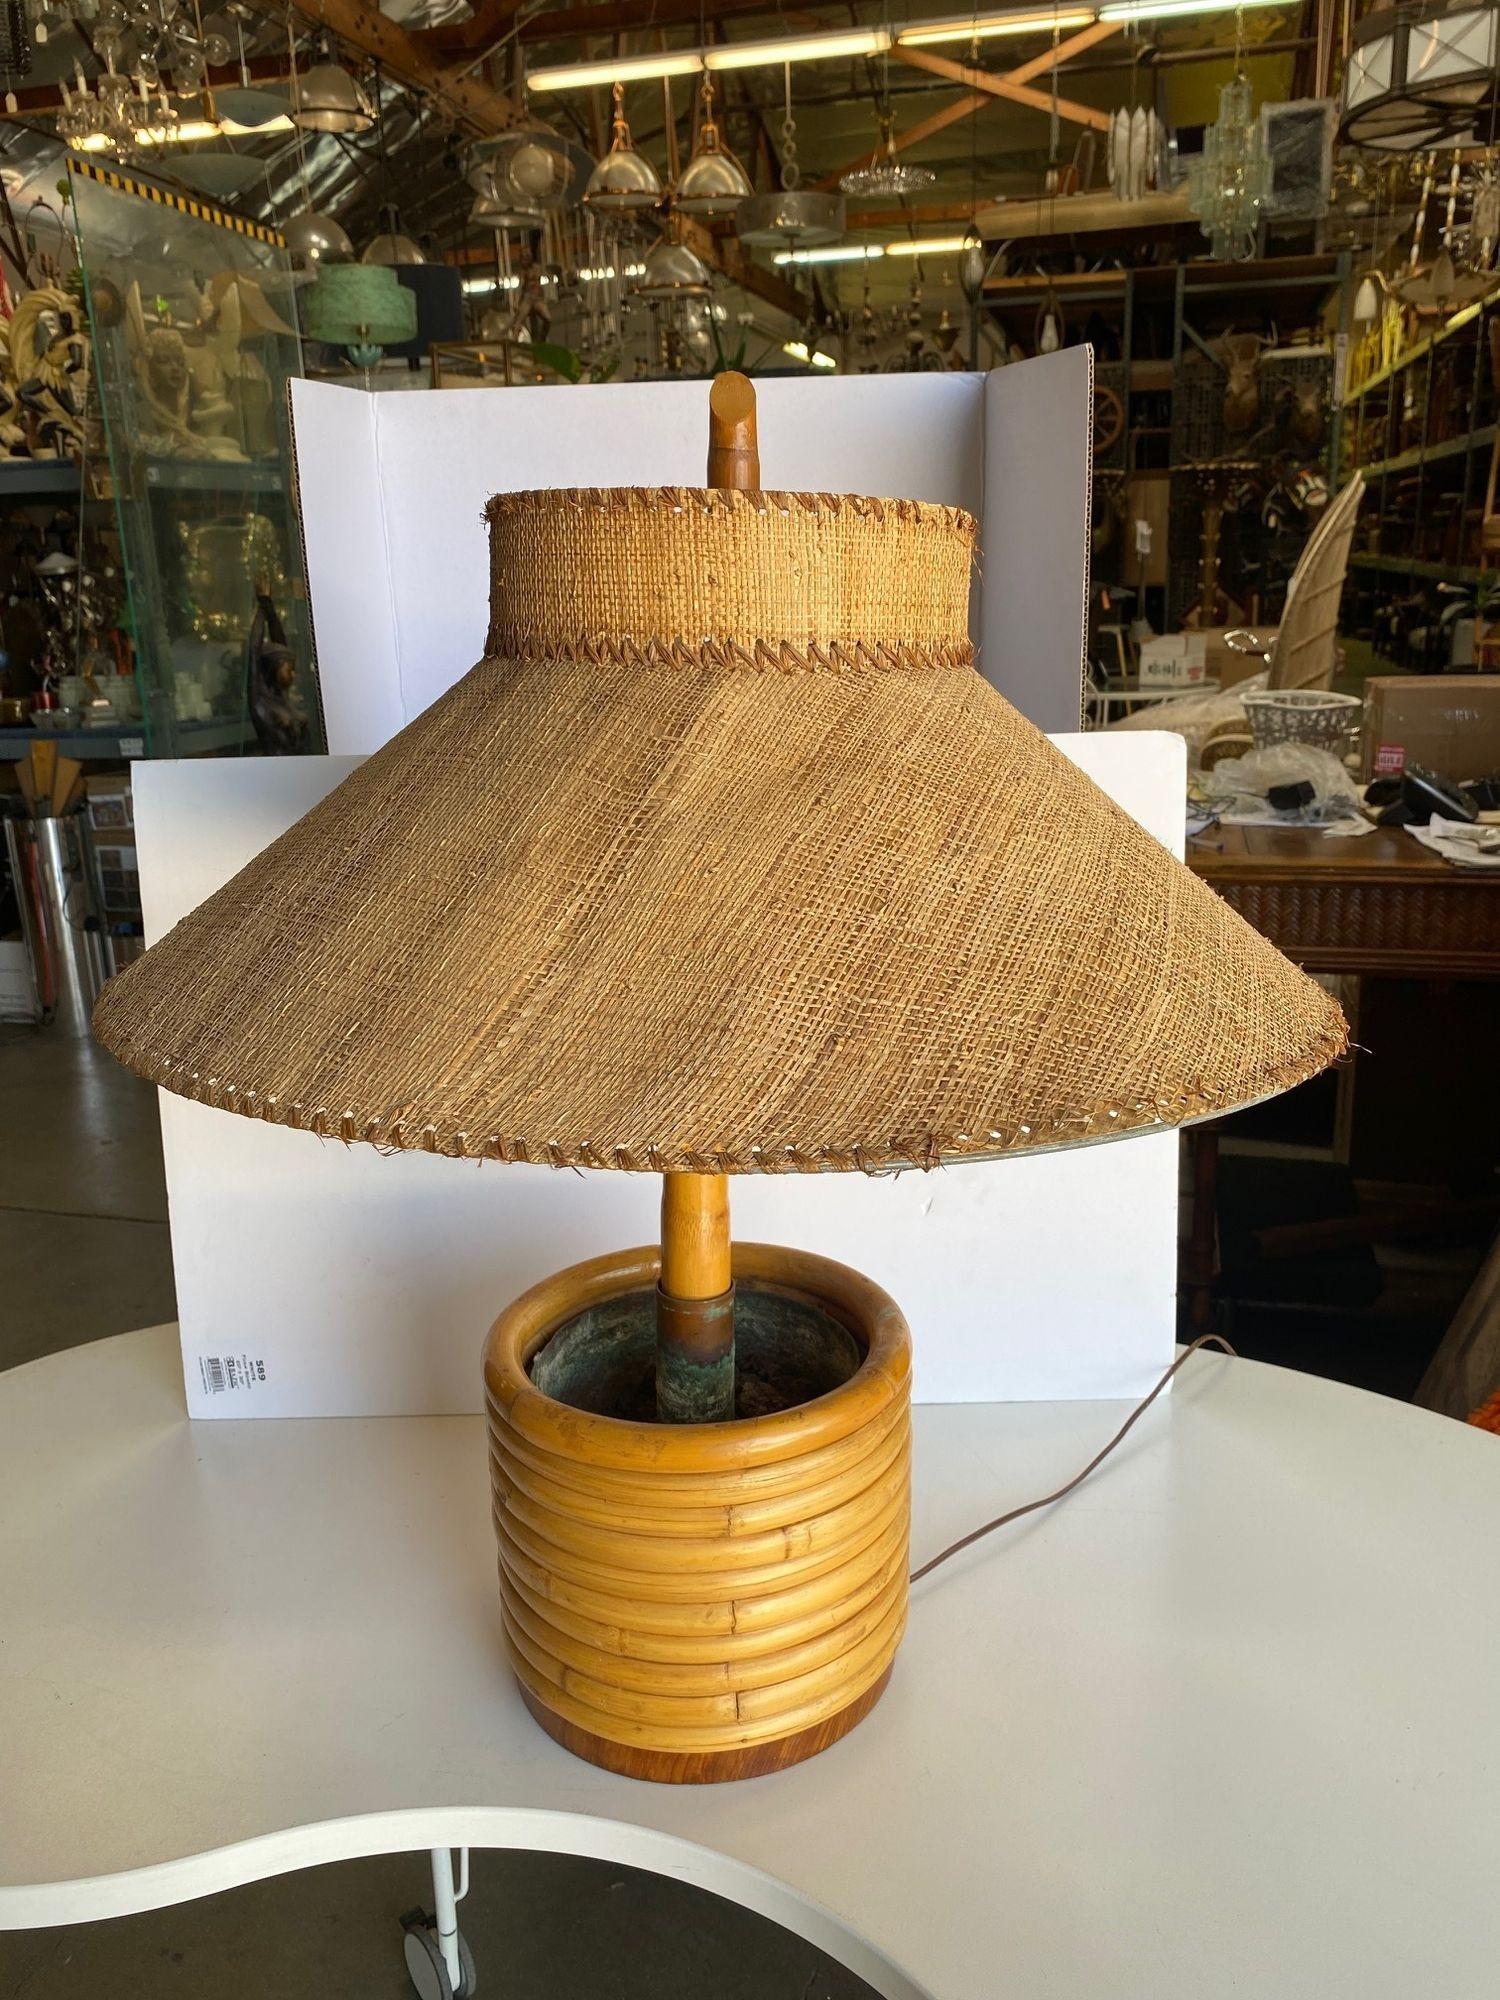 Pair of restored Mid-Century round stacked rattan rattan table lamps featuring 10 staked rattan poles stacked fixed to a mahogany round base, circa 1950. Measures 9.5